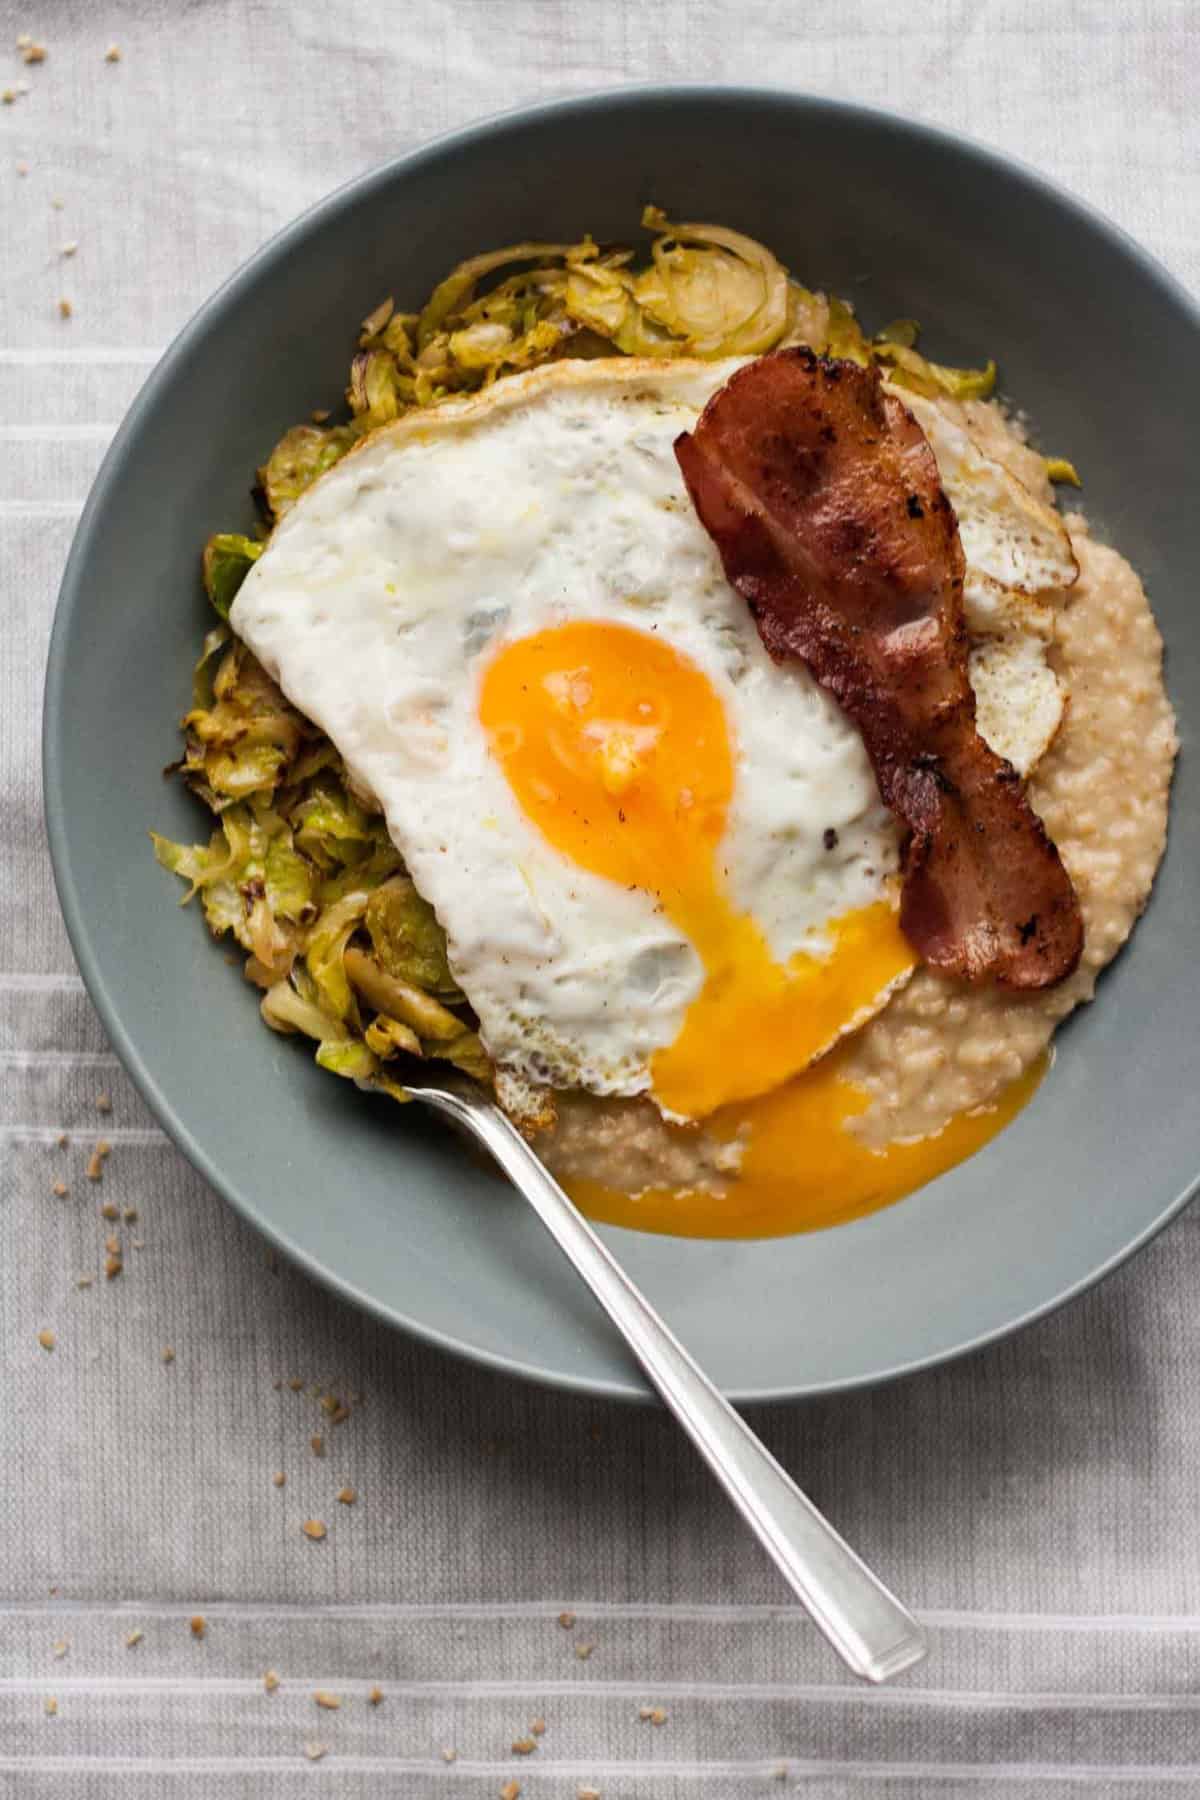 Savoury Porridge with Brussels Sprouts - this savoury oatmeal recipe is the perfect easy comfort food that is ready in less than half an hour! | eatloveeats.com